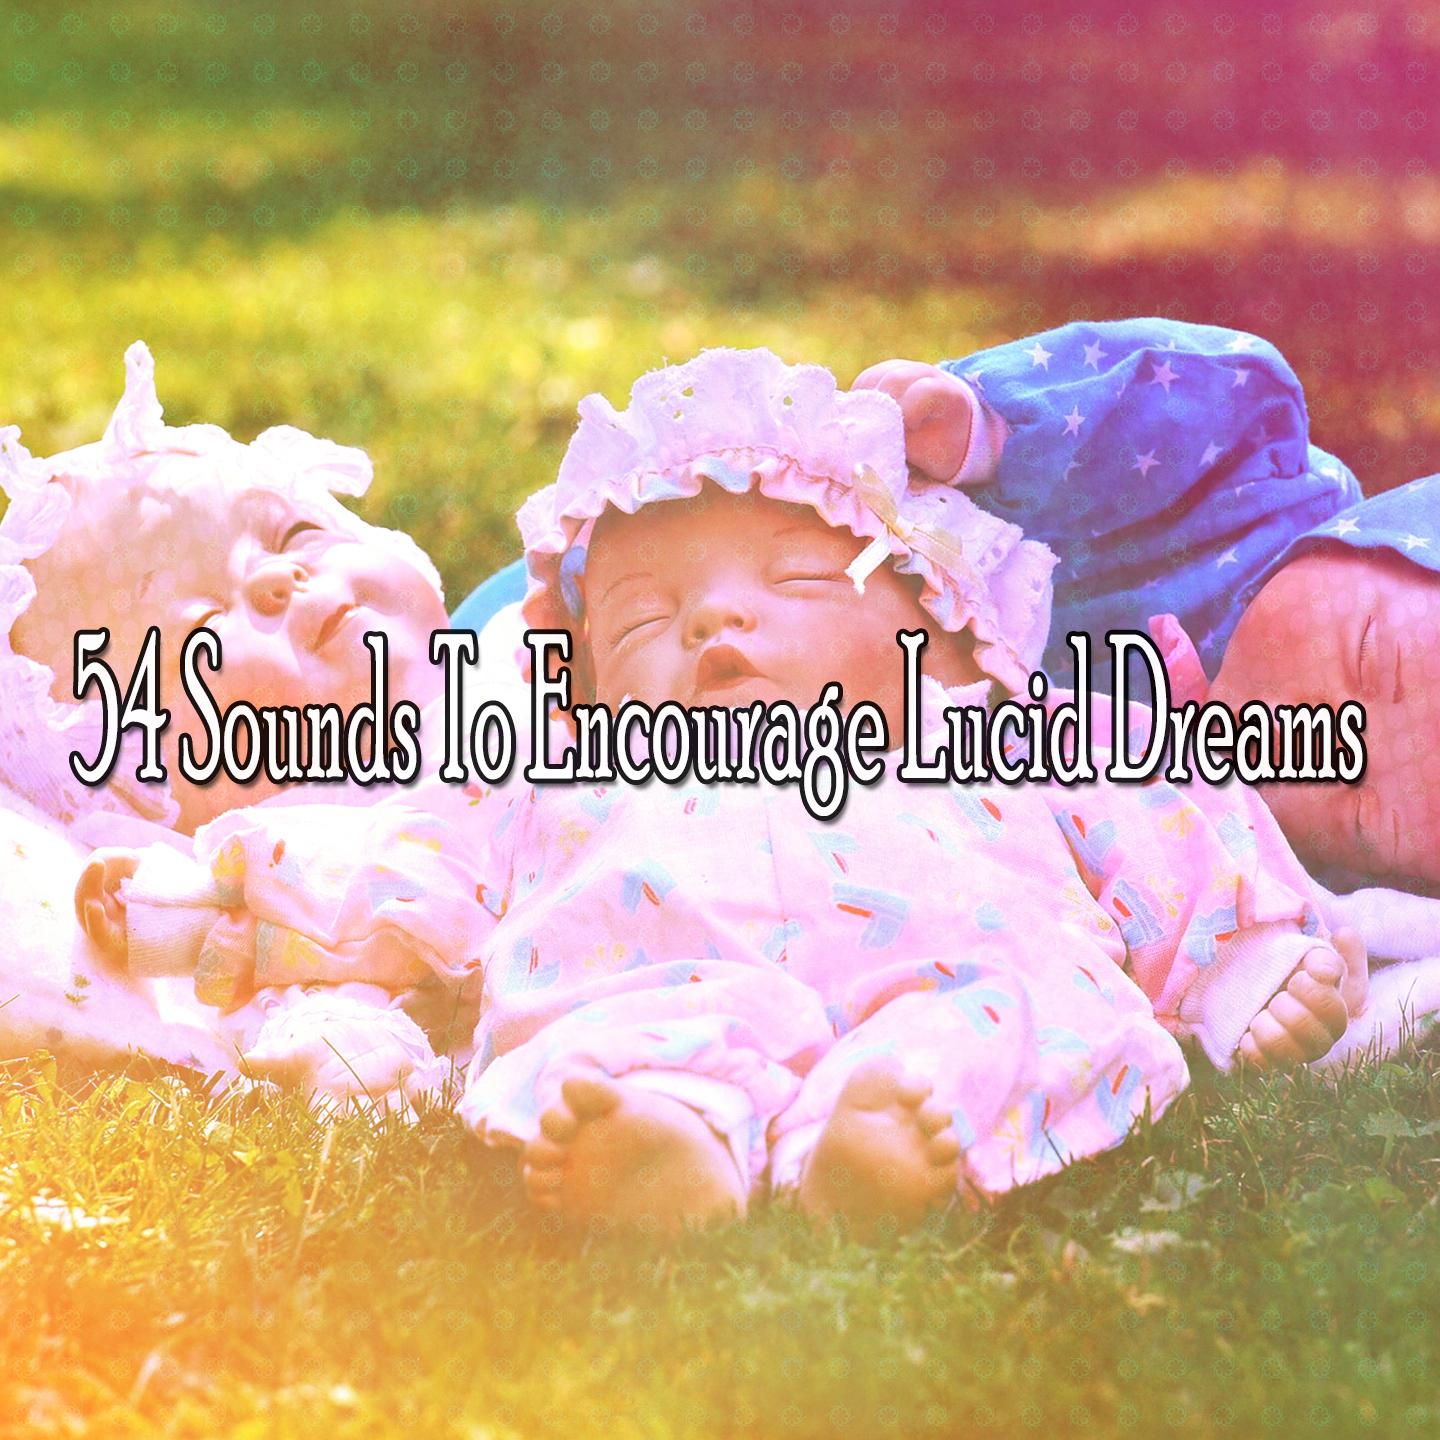 54 Sounds to Encourage Lucid Dreams